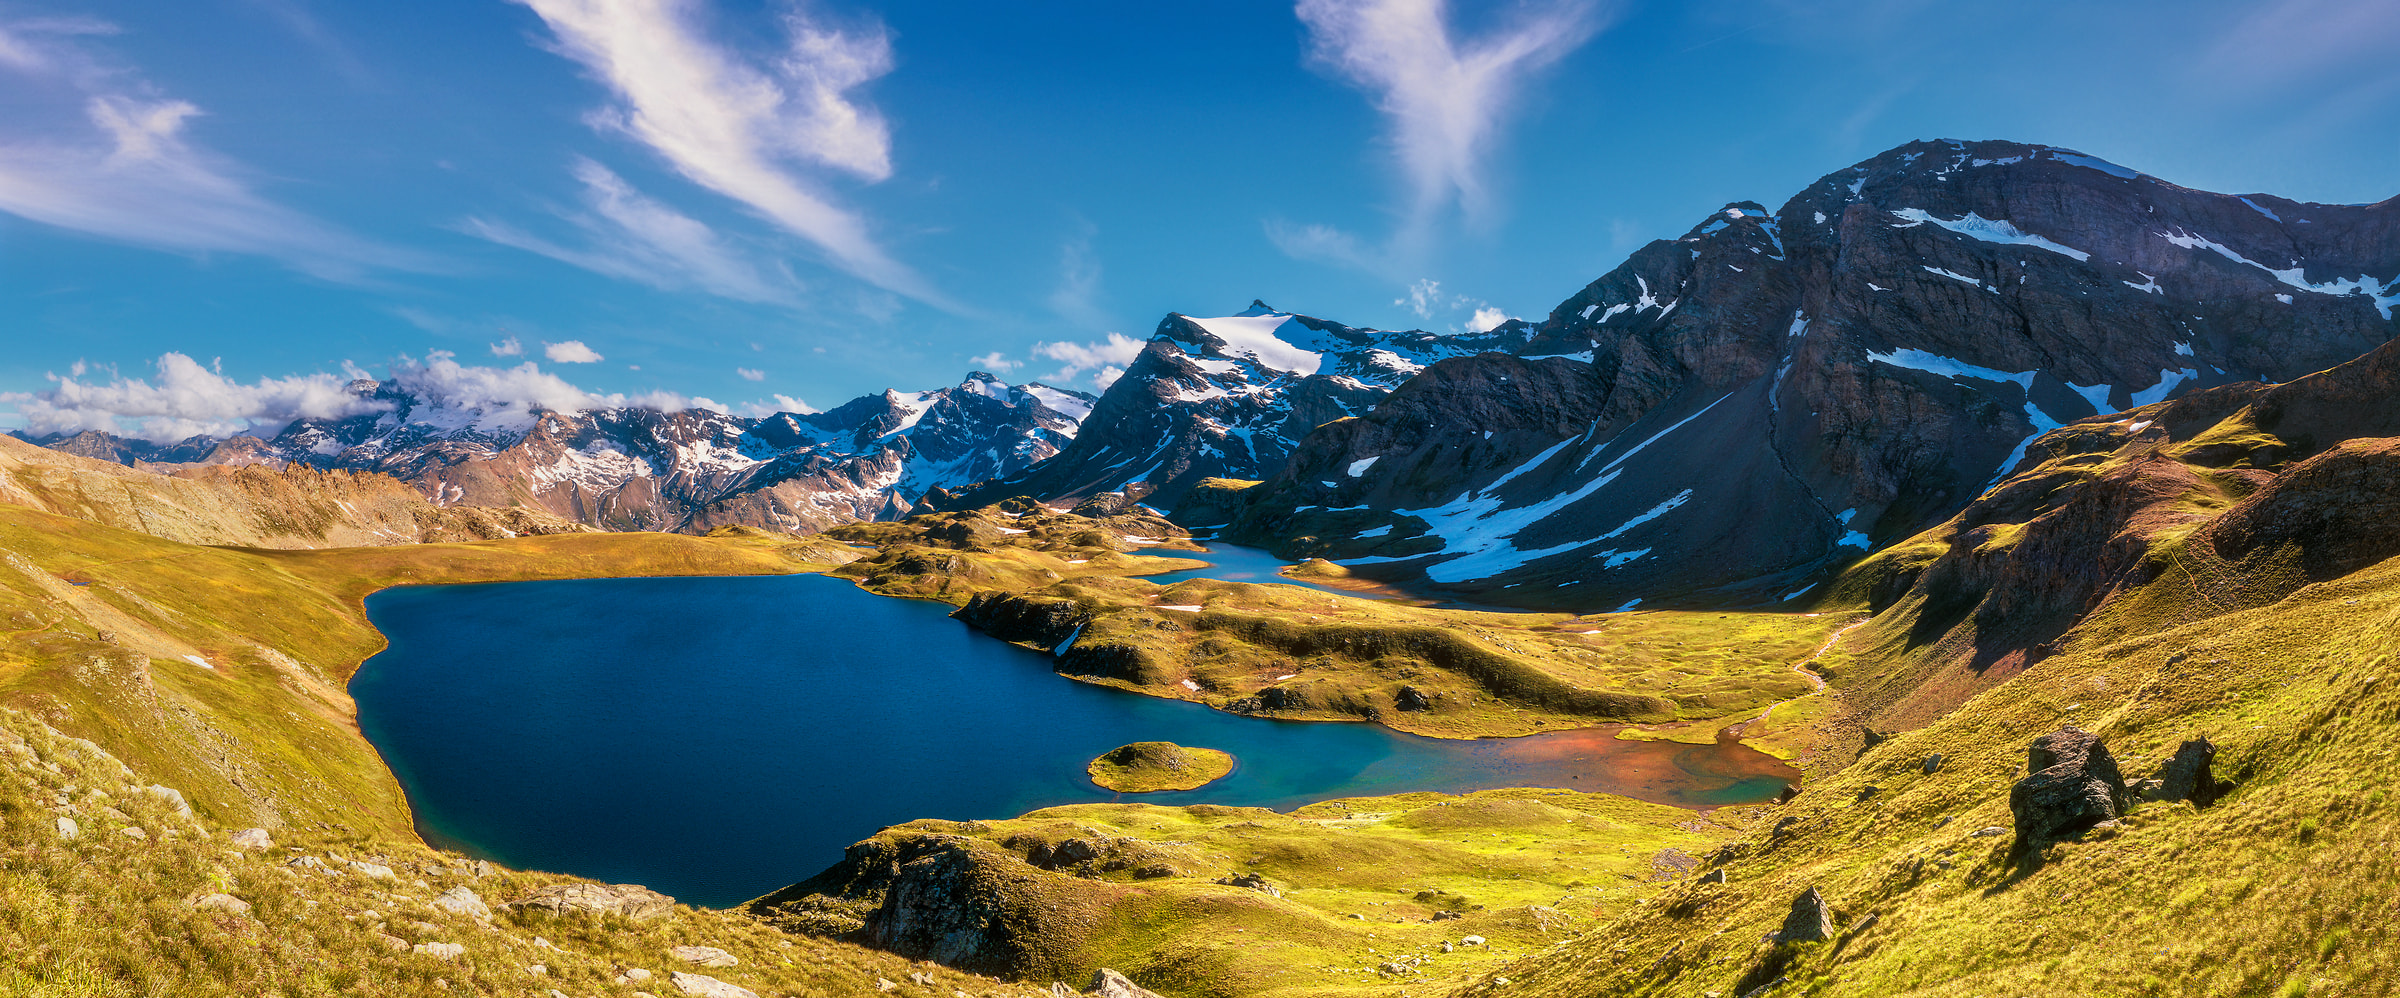 103 megapixels! A very high resolution, large-format VAST photograph of an alpine lake with mountains and a blue sky with clouds; landscape photograph created by Duilio Fiorille in Gran Paradiso National Park, Ceresole Reale, Piedmont, Italy.